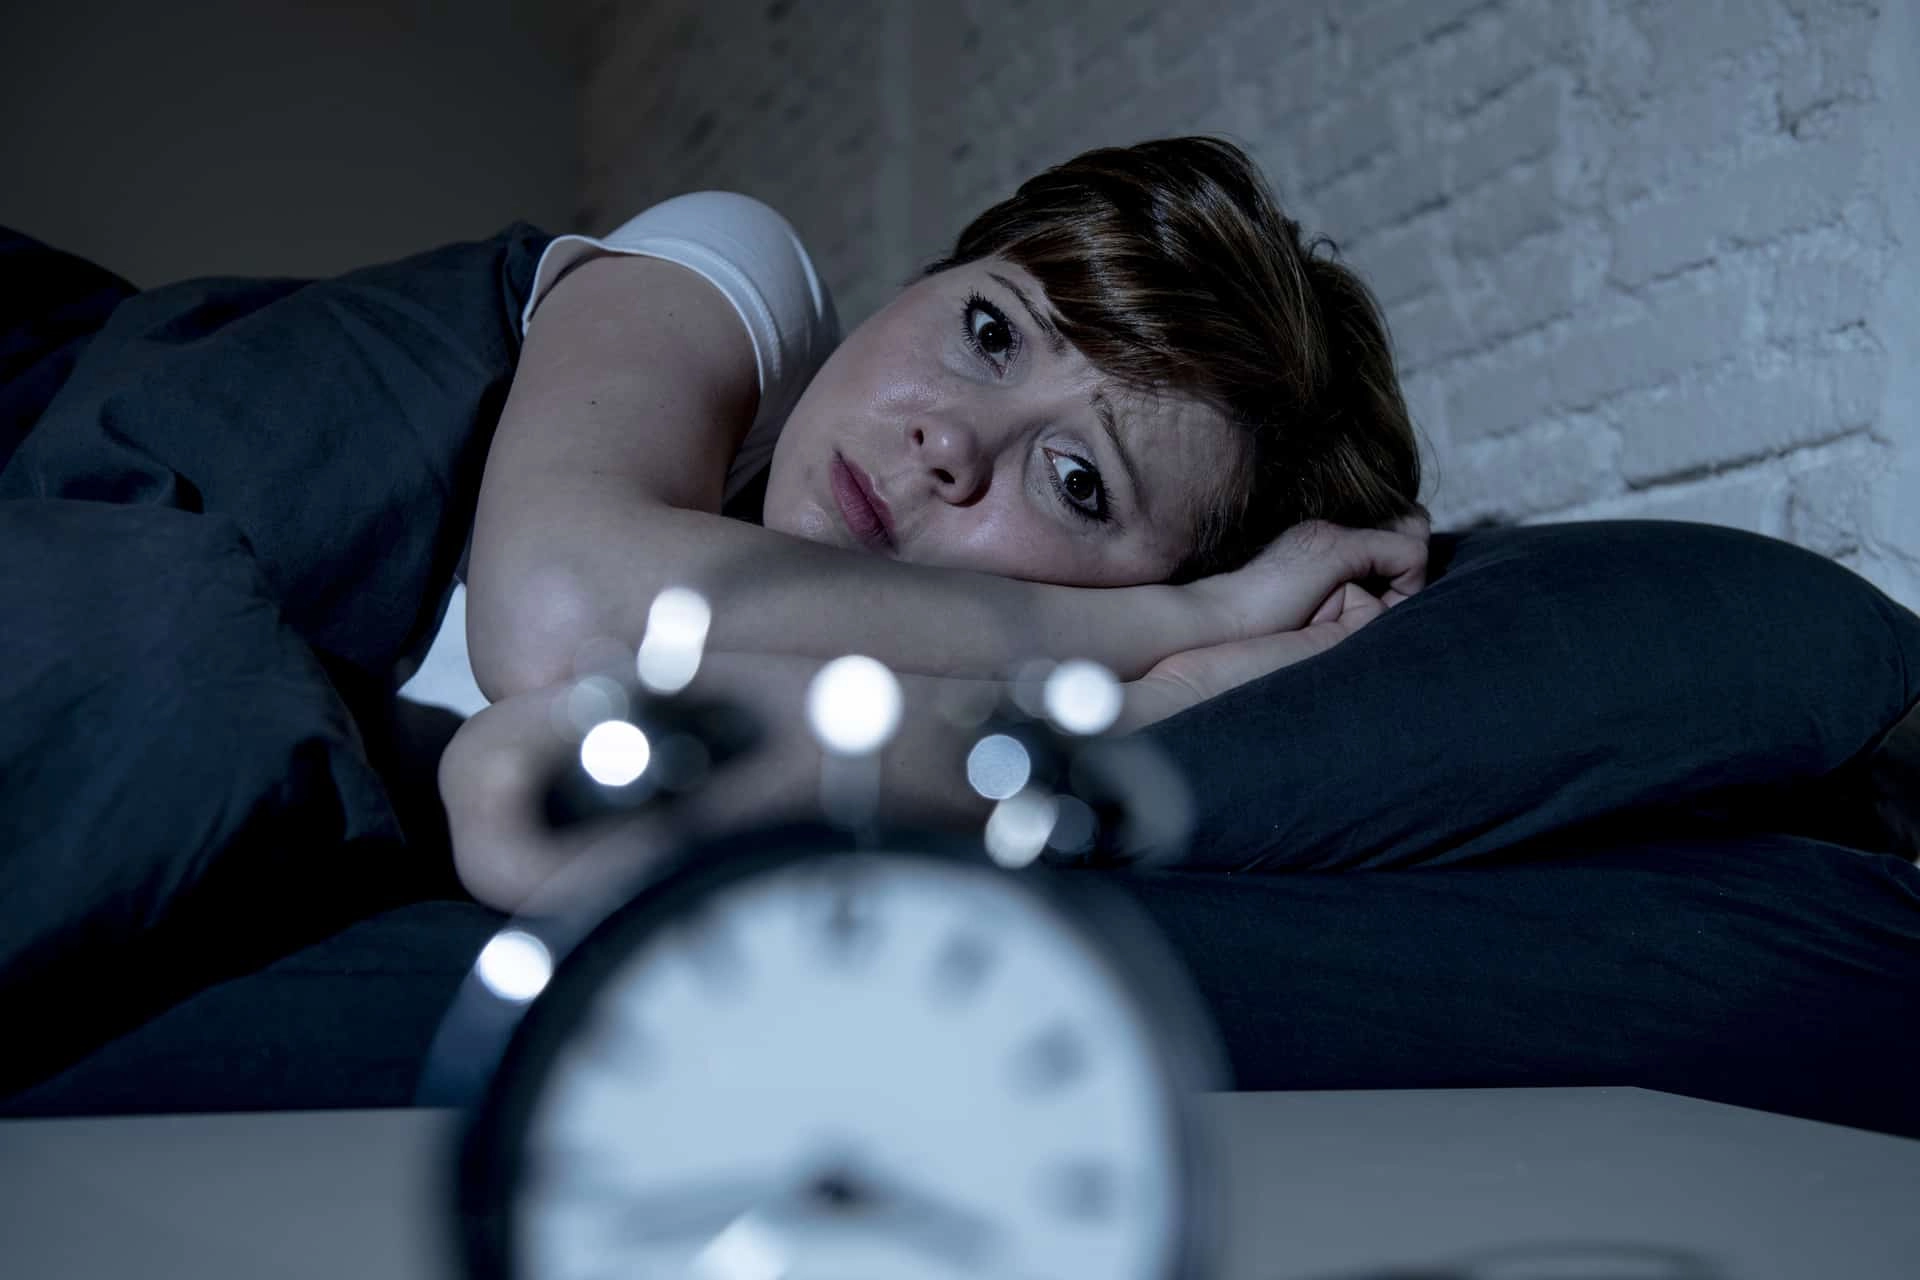 The Link Between Sleep Deprivation and Increased Risk of Illness